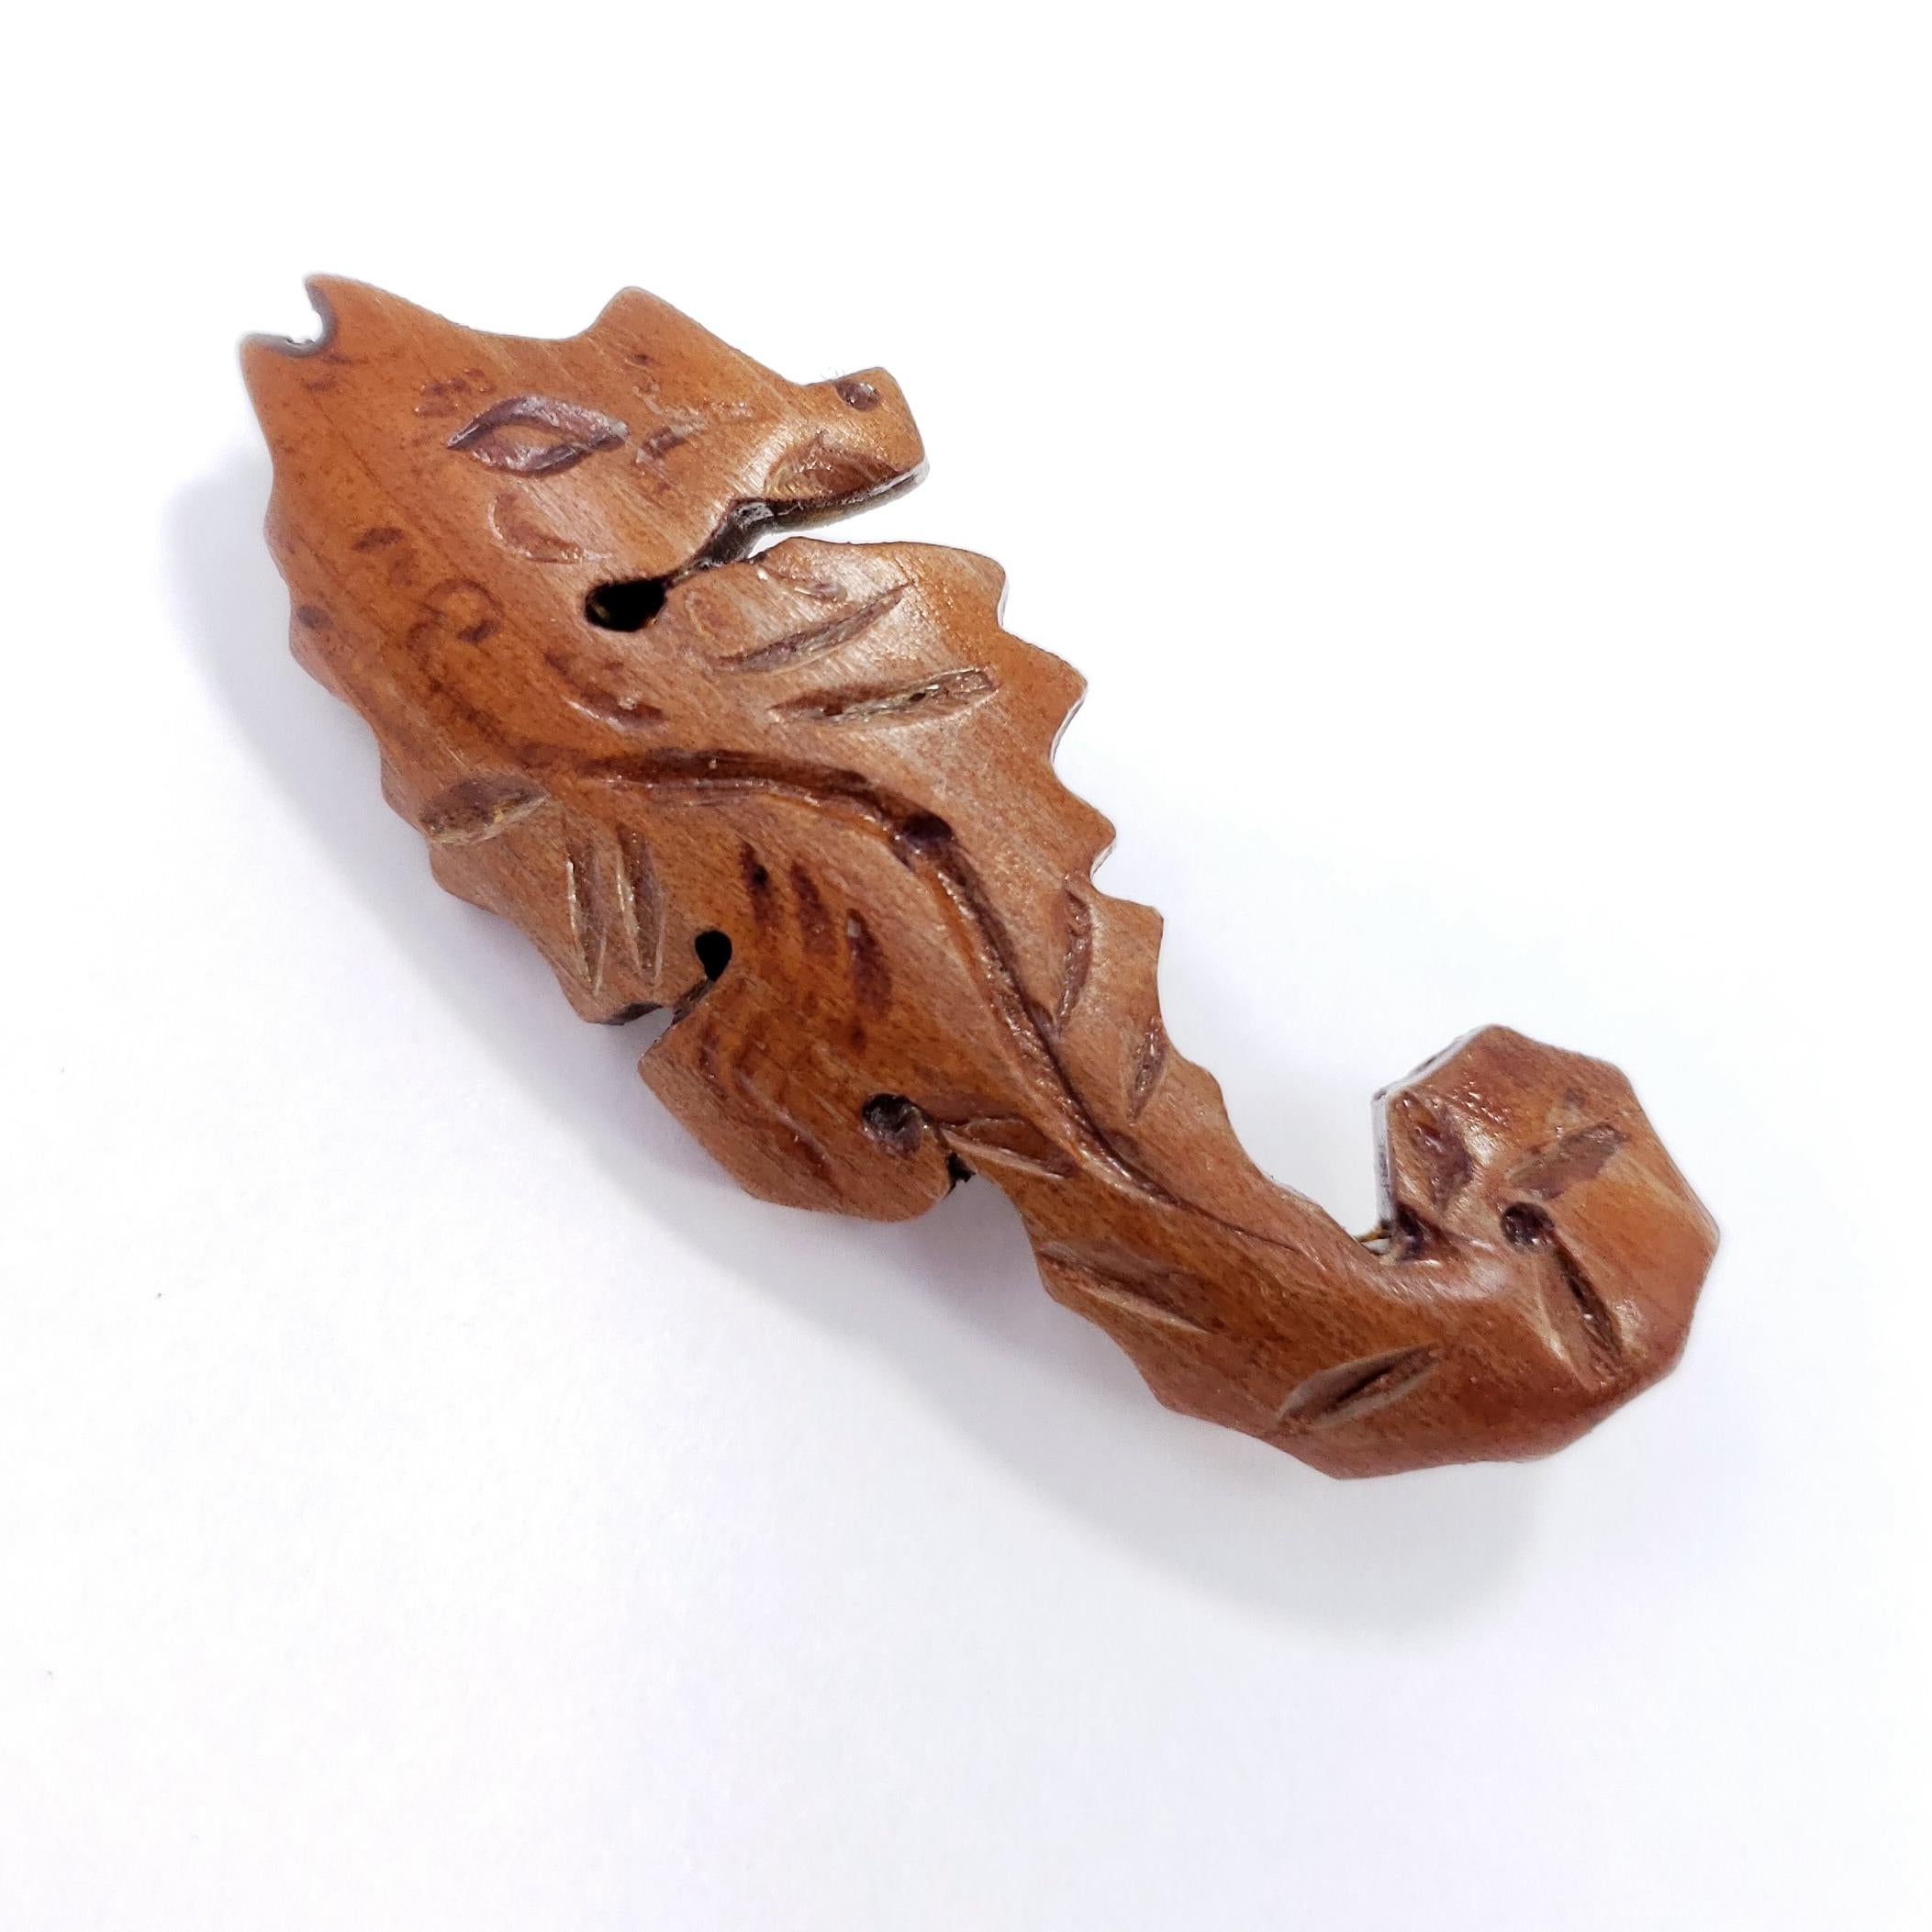 A stylish wooden pin, featuring a carved seahorse. Vintage, mid to late 1900s.

Hallmarks: n/a